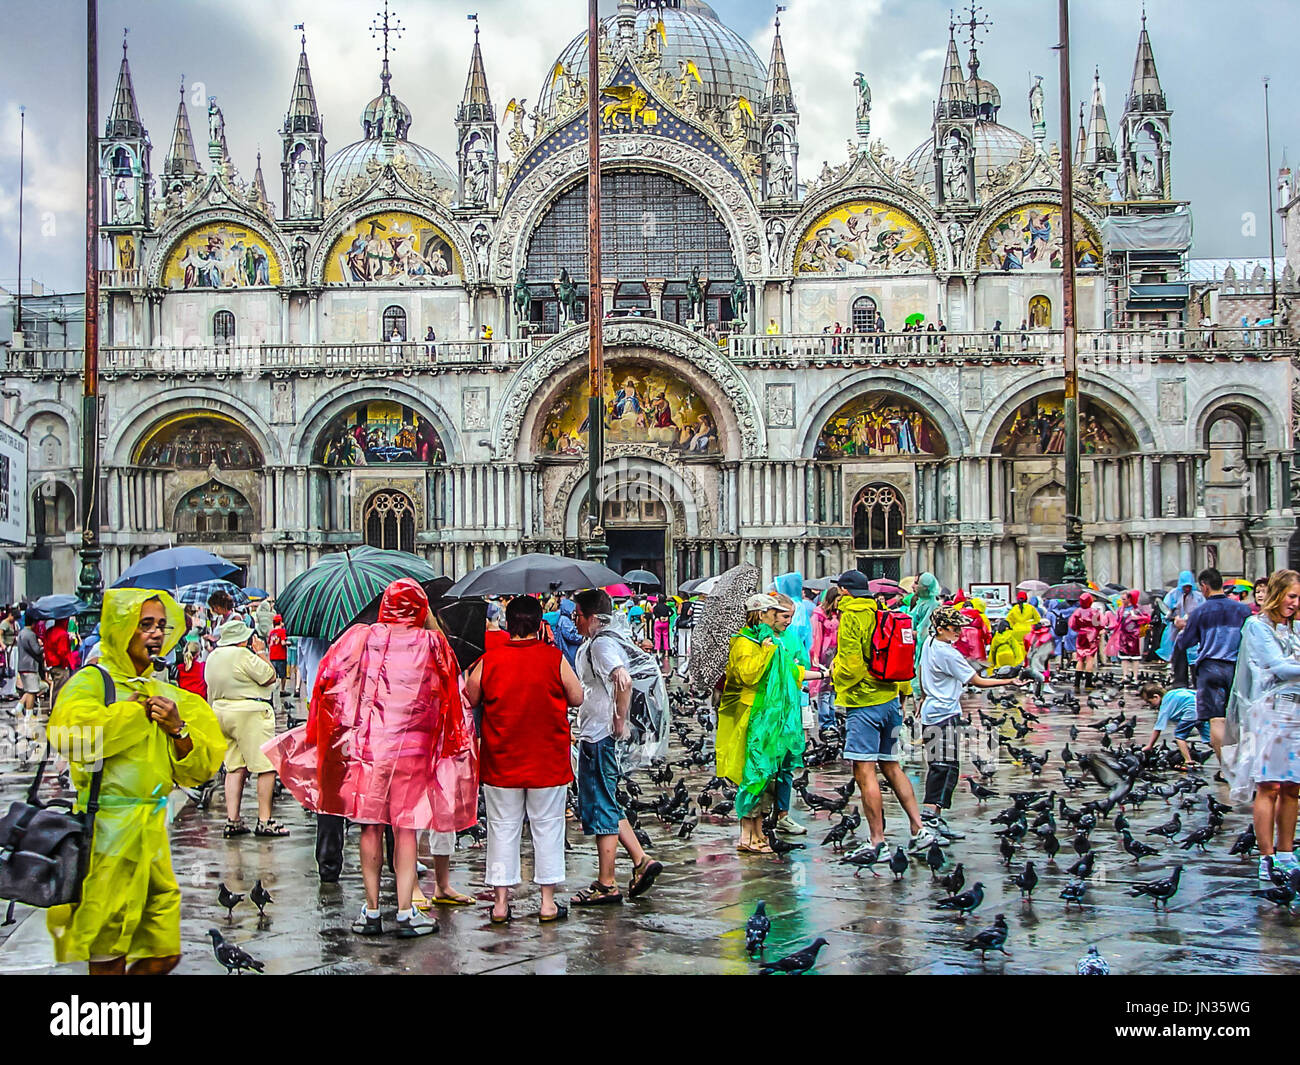 St Mark's cathedral basilica in Venice Italy on a rainy day crowded with tourists in colorful raincoats and umbrellas as pigeons walk around Stock Photo